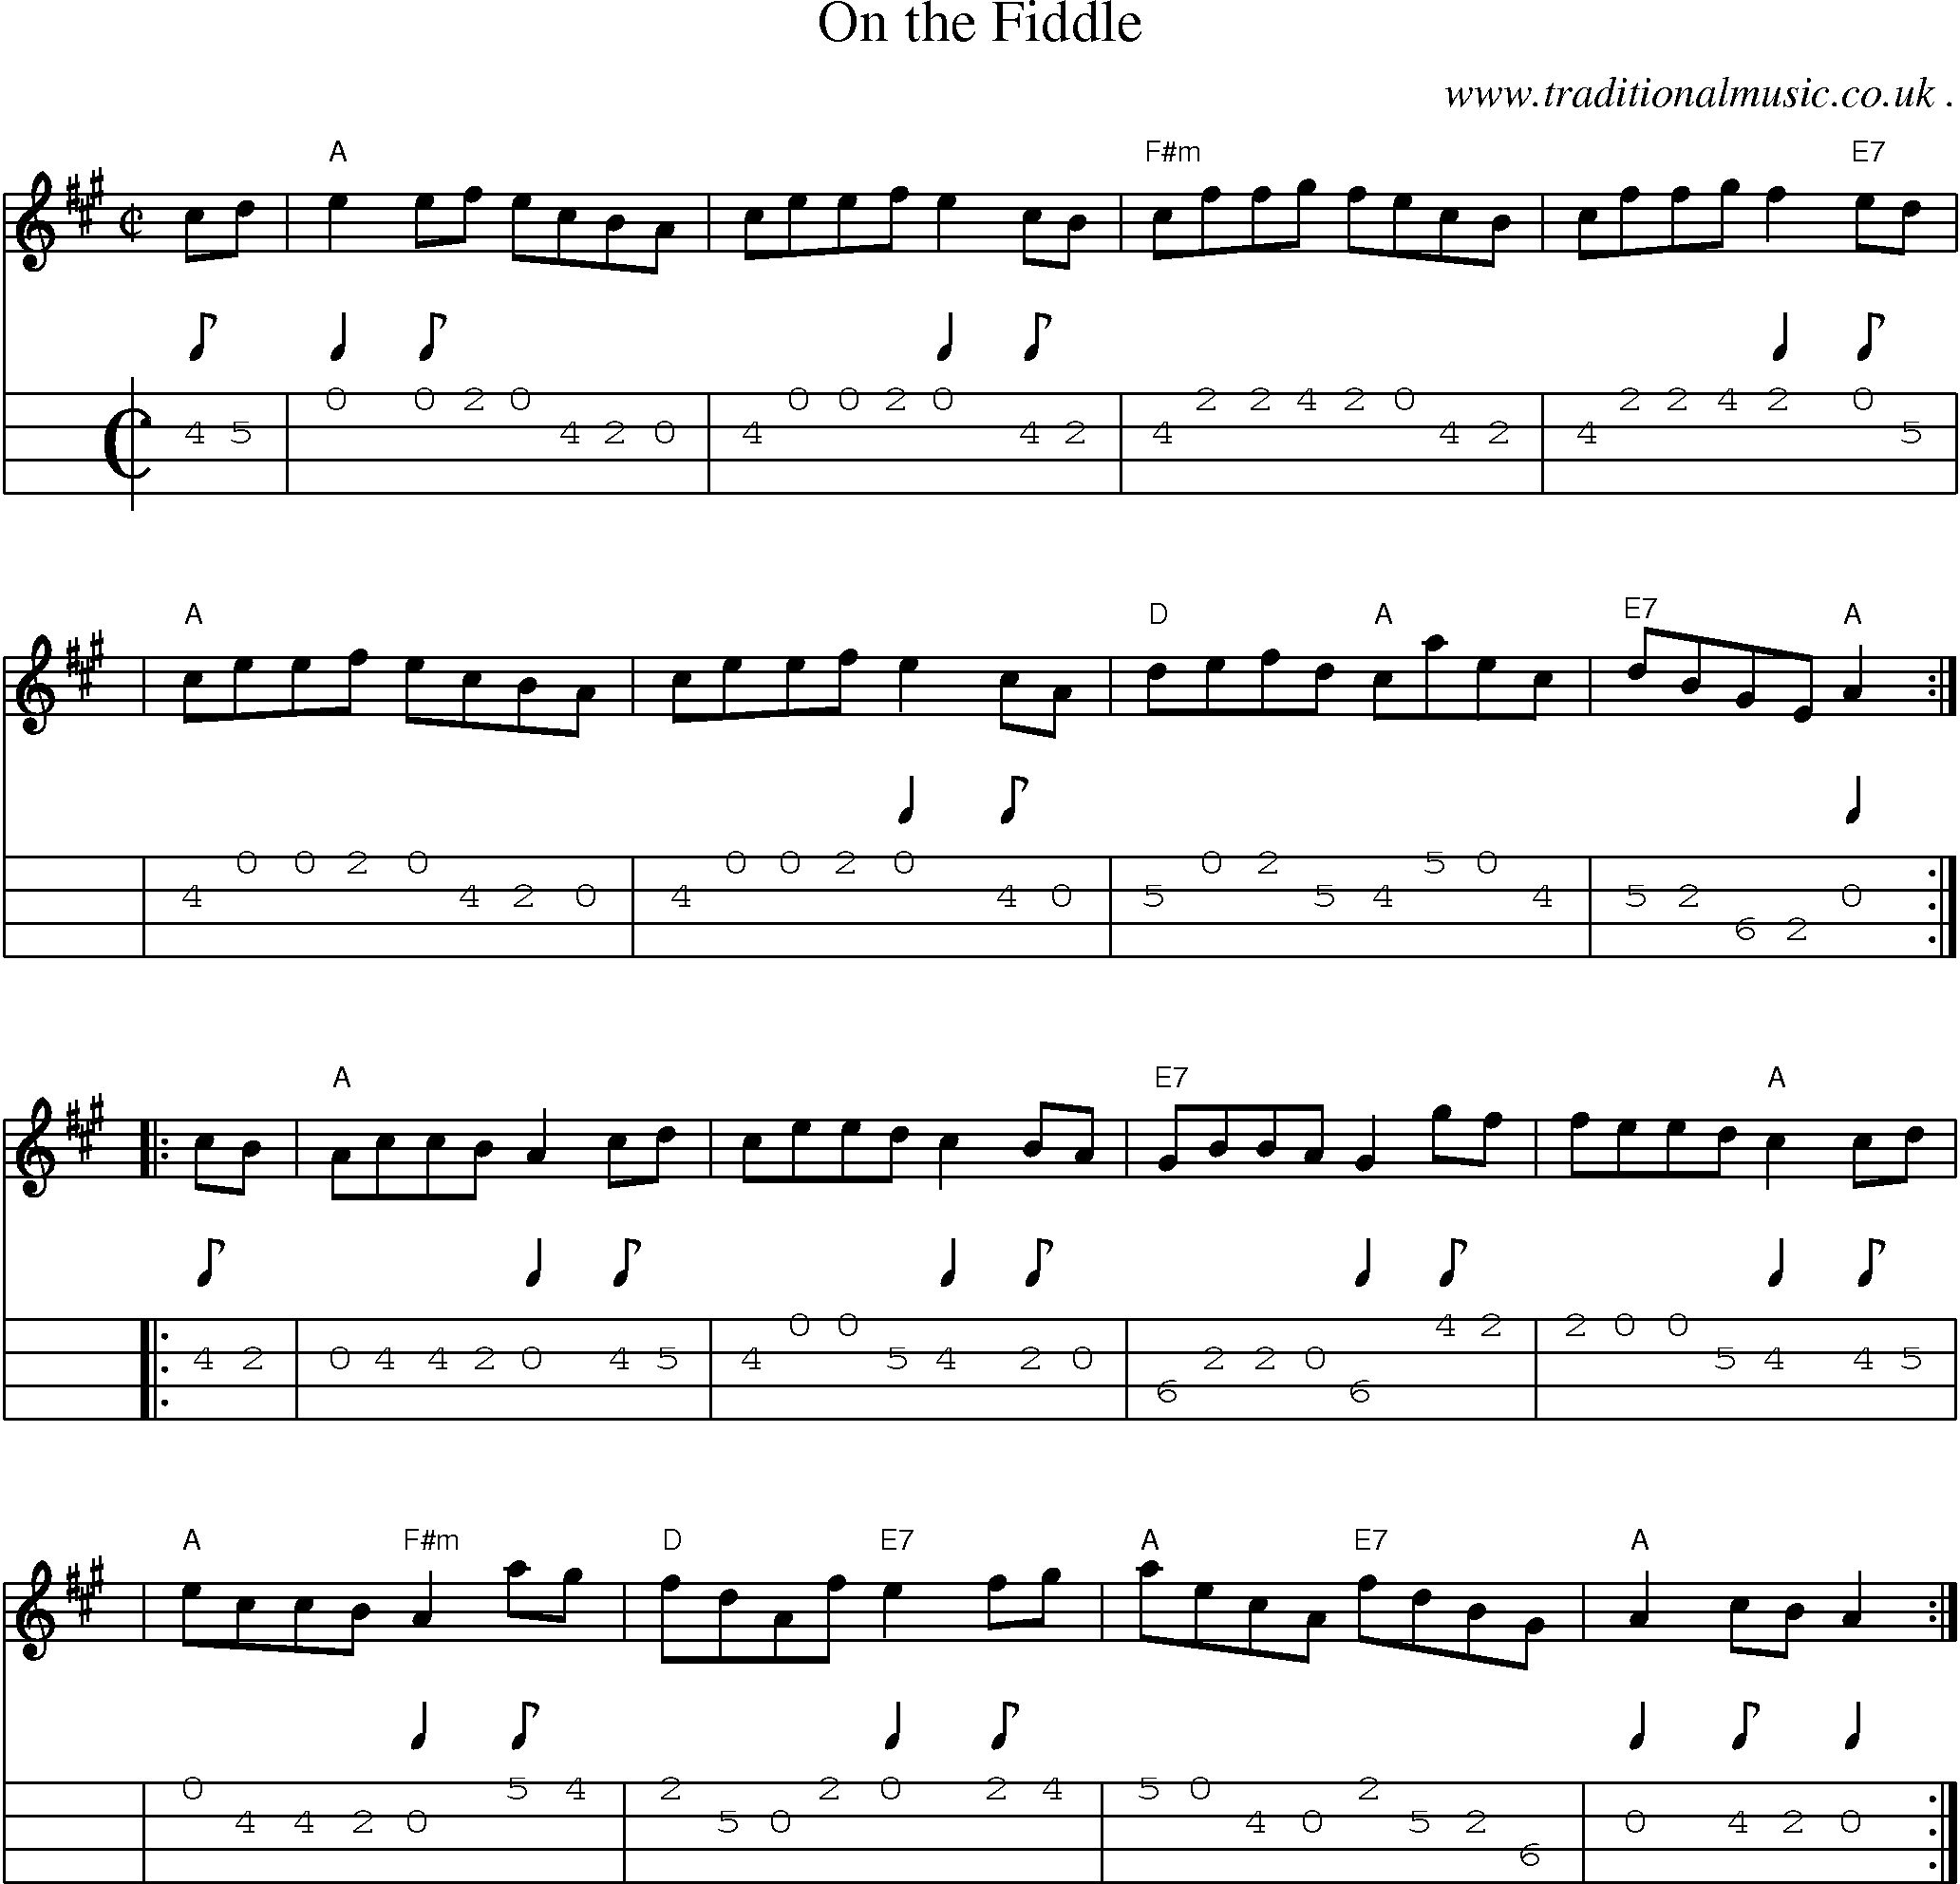 Sheet-music  score, Chords and Mandolin Tabs for On The Fiddle